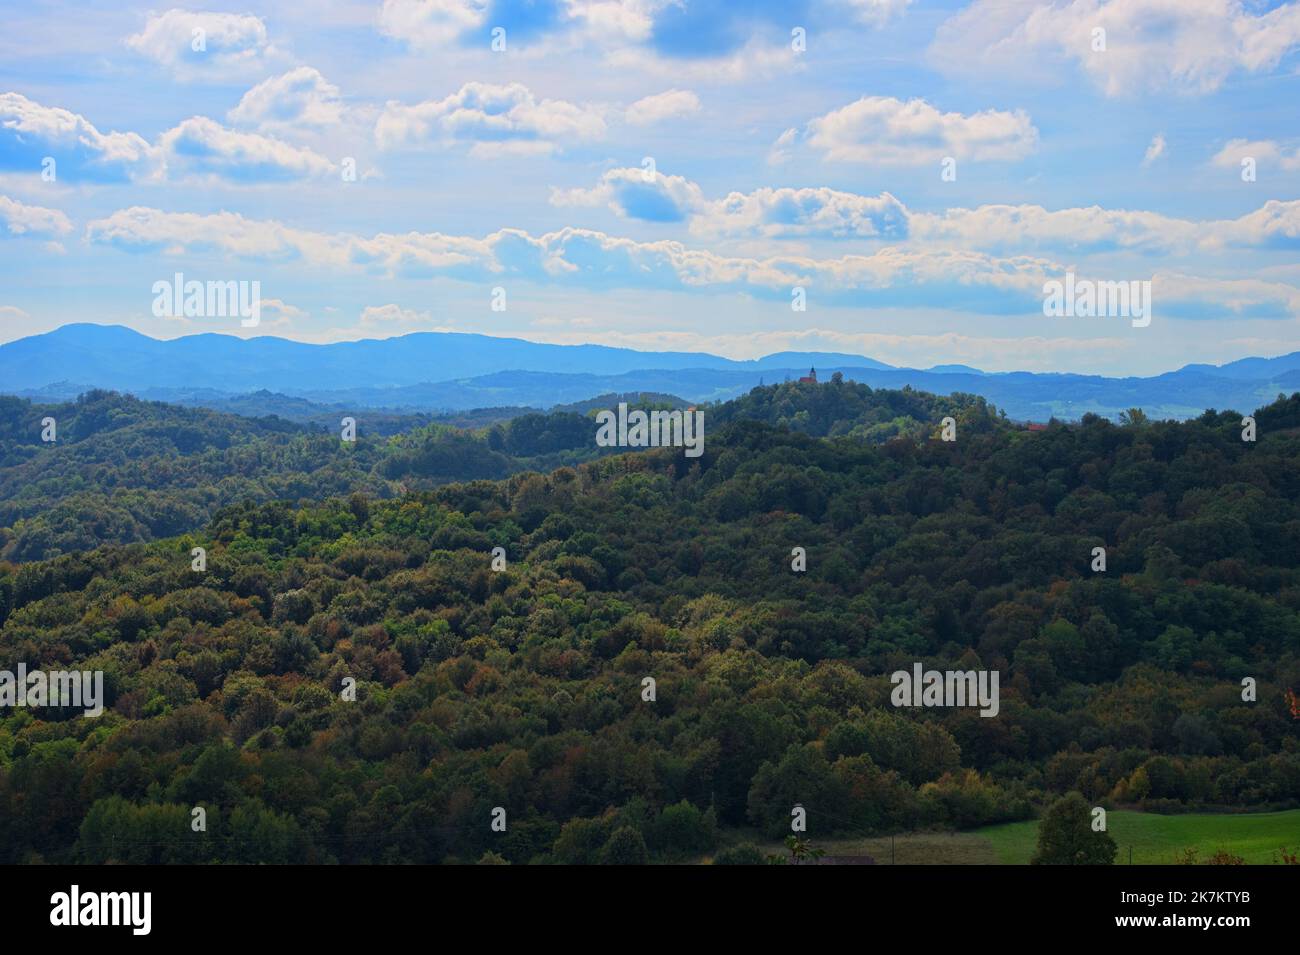 Scenic view of forest and mountains in autumn colors Stock Photo